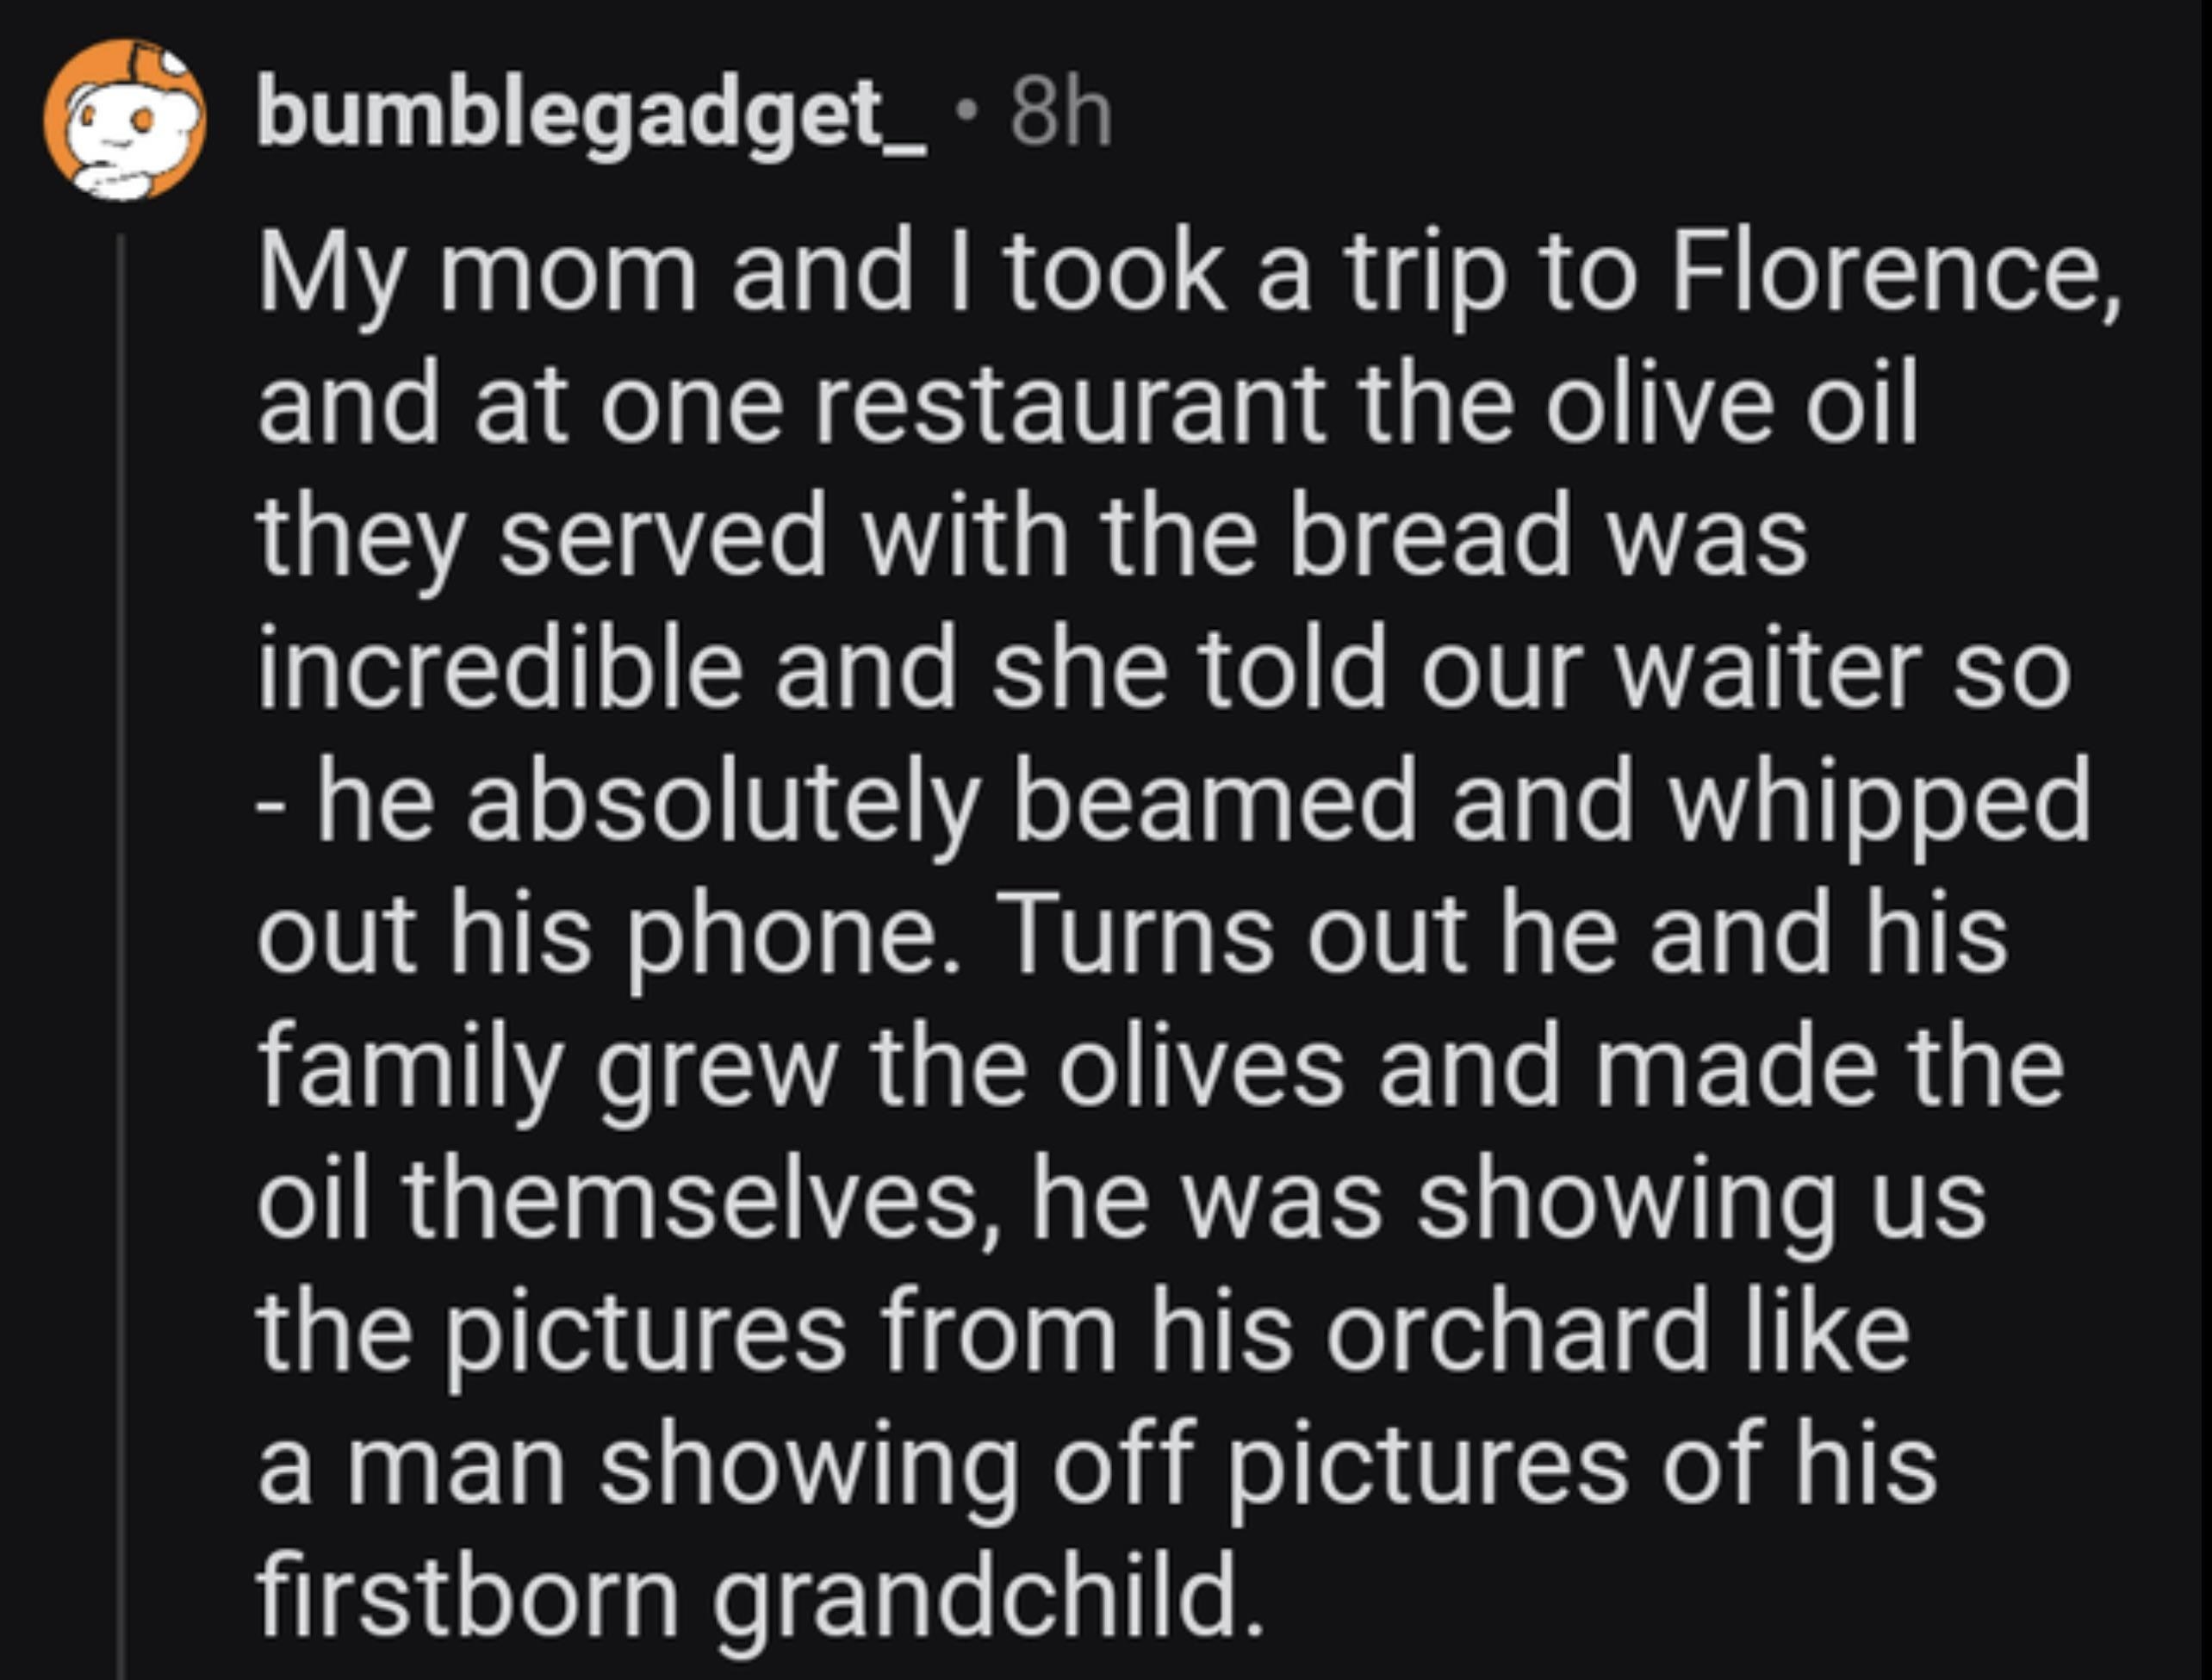 a woman complimented a waiter about the olive oil at a restaurant and it turned out the waiter and his family grew the olives and made the oil